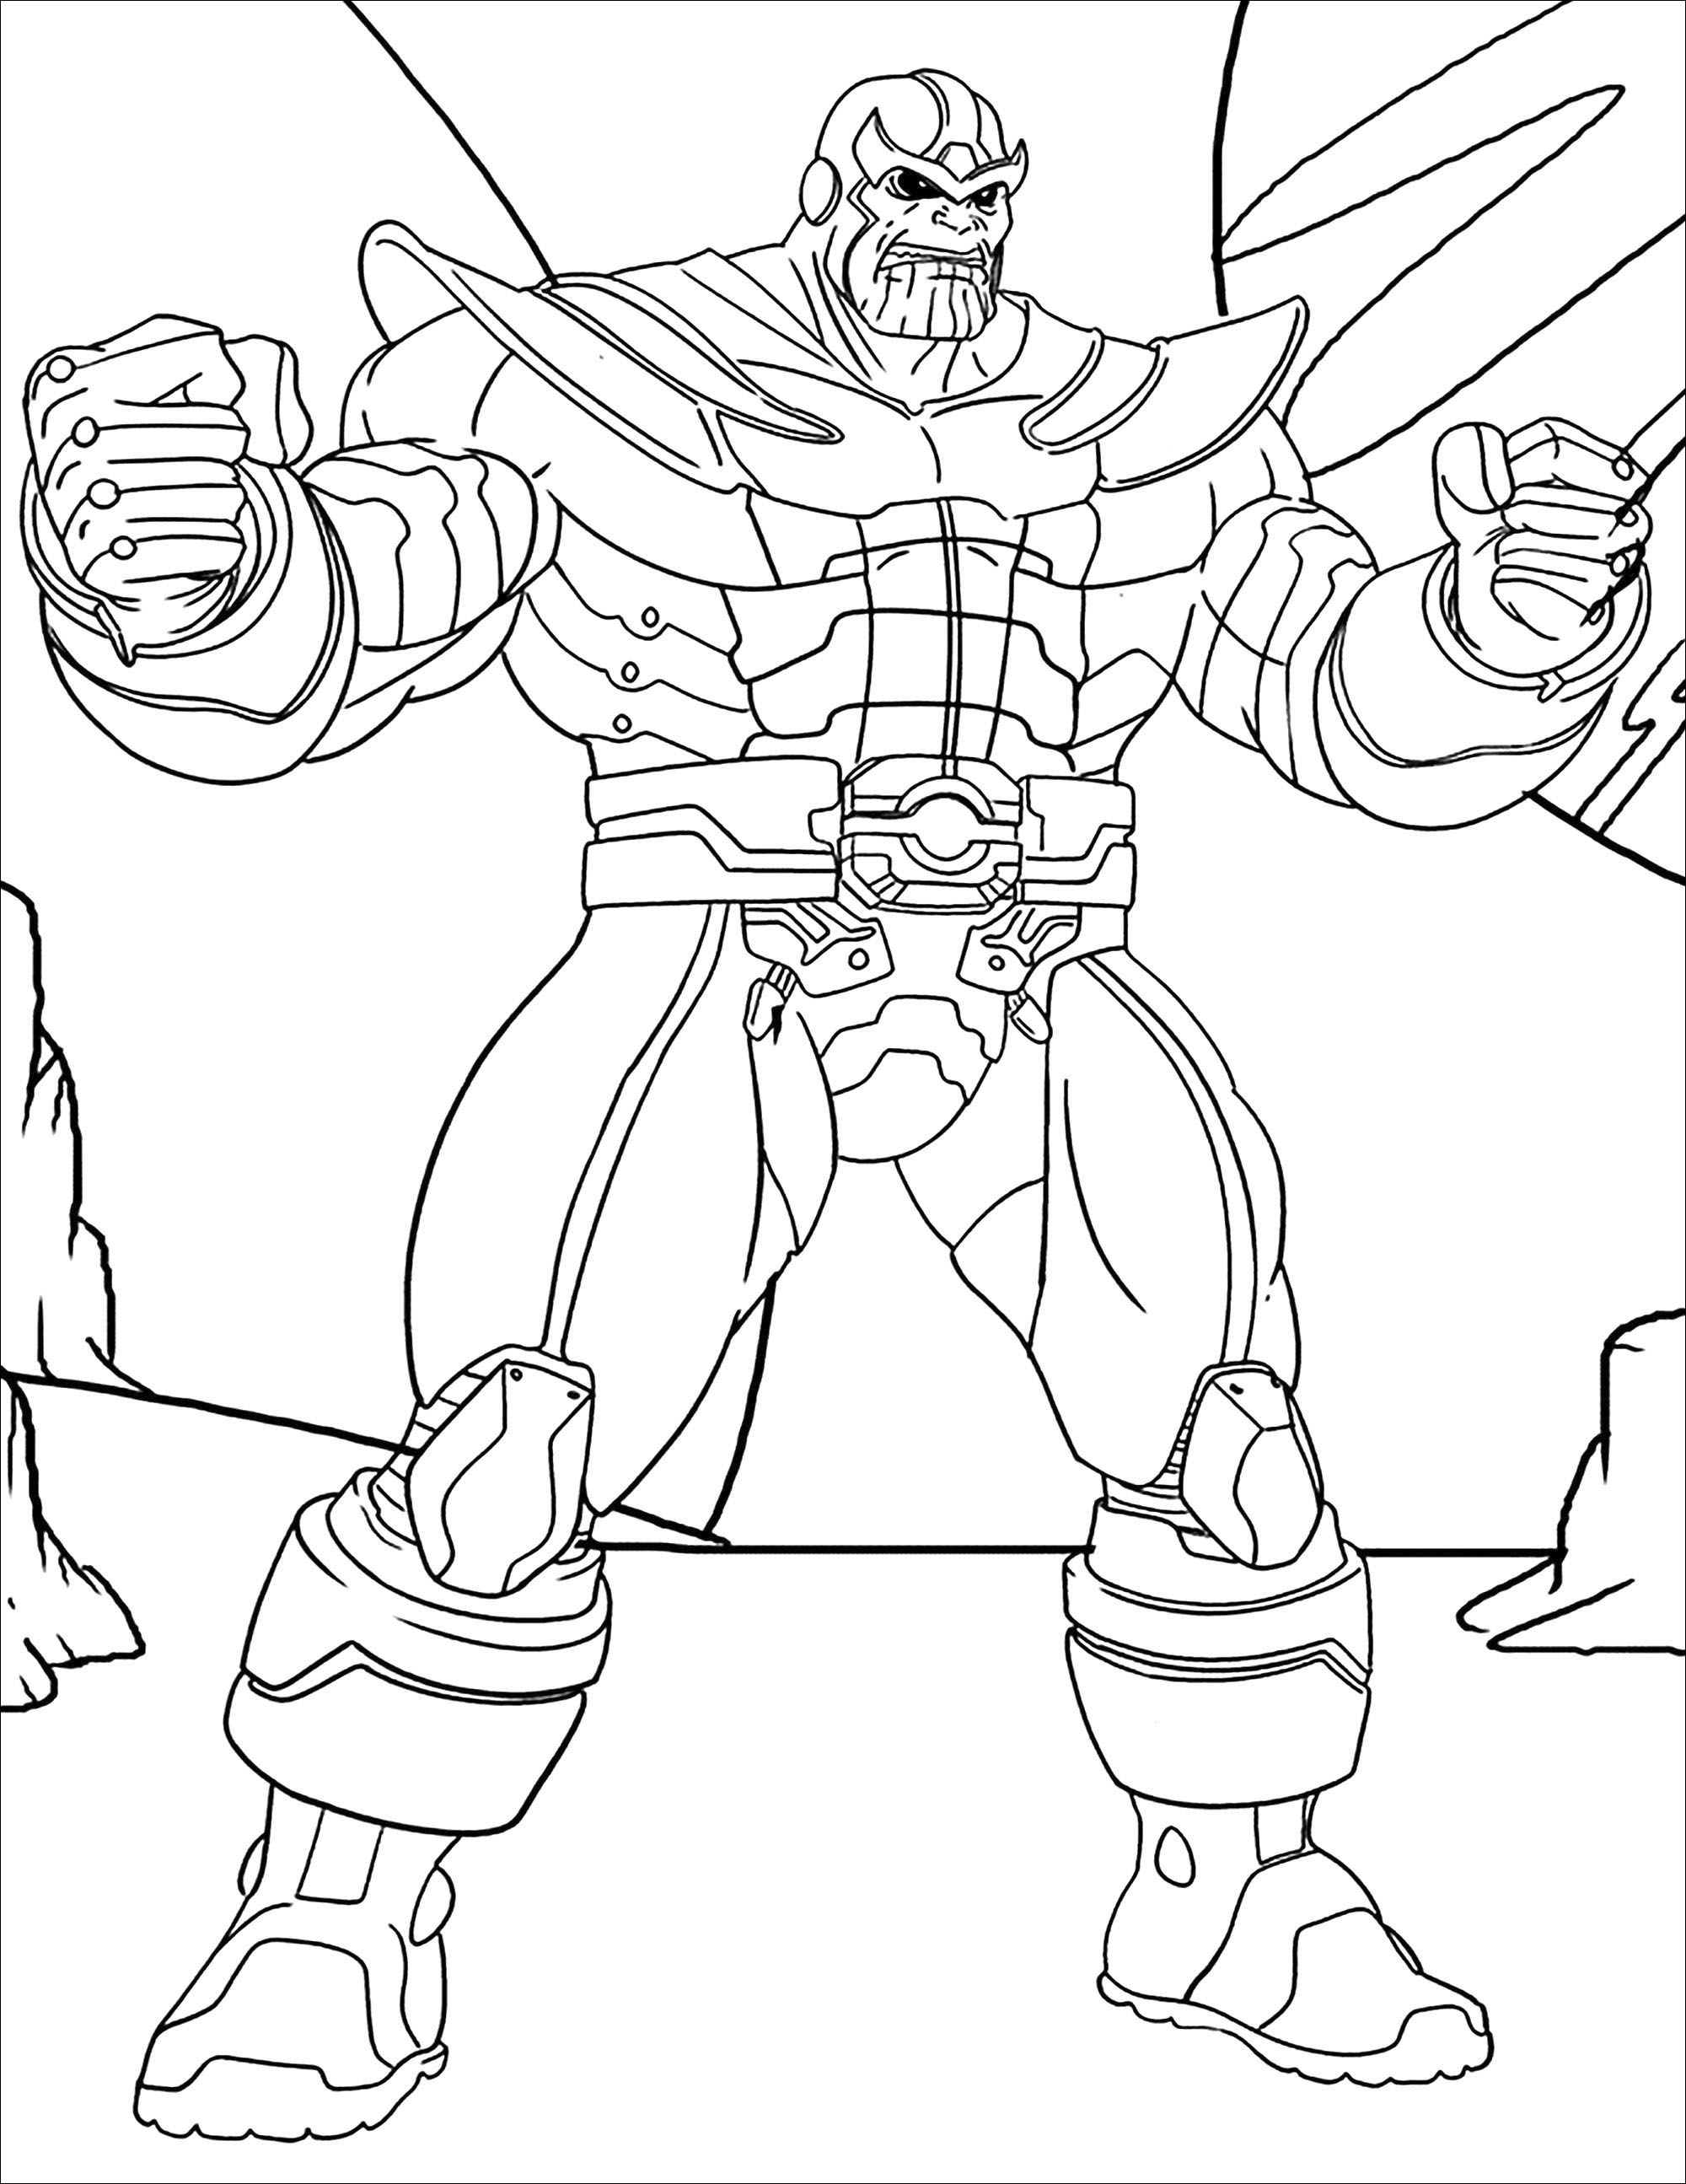 Thanos Coloring Pages Best Coloring Pages For Kids